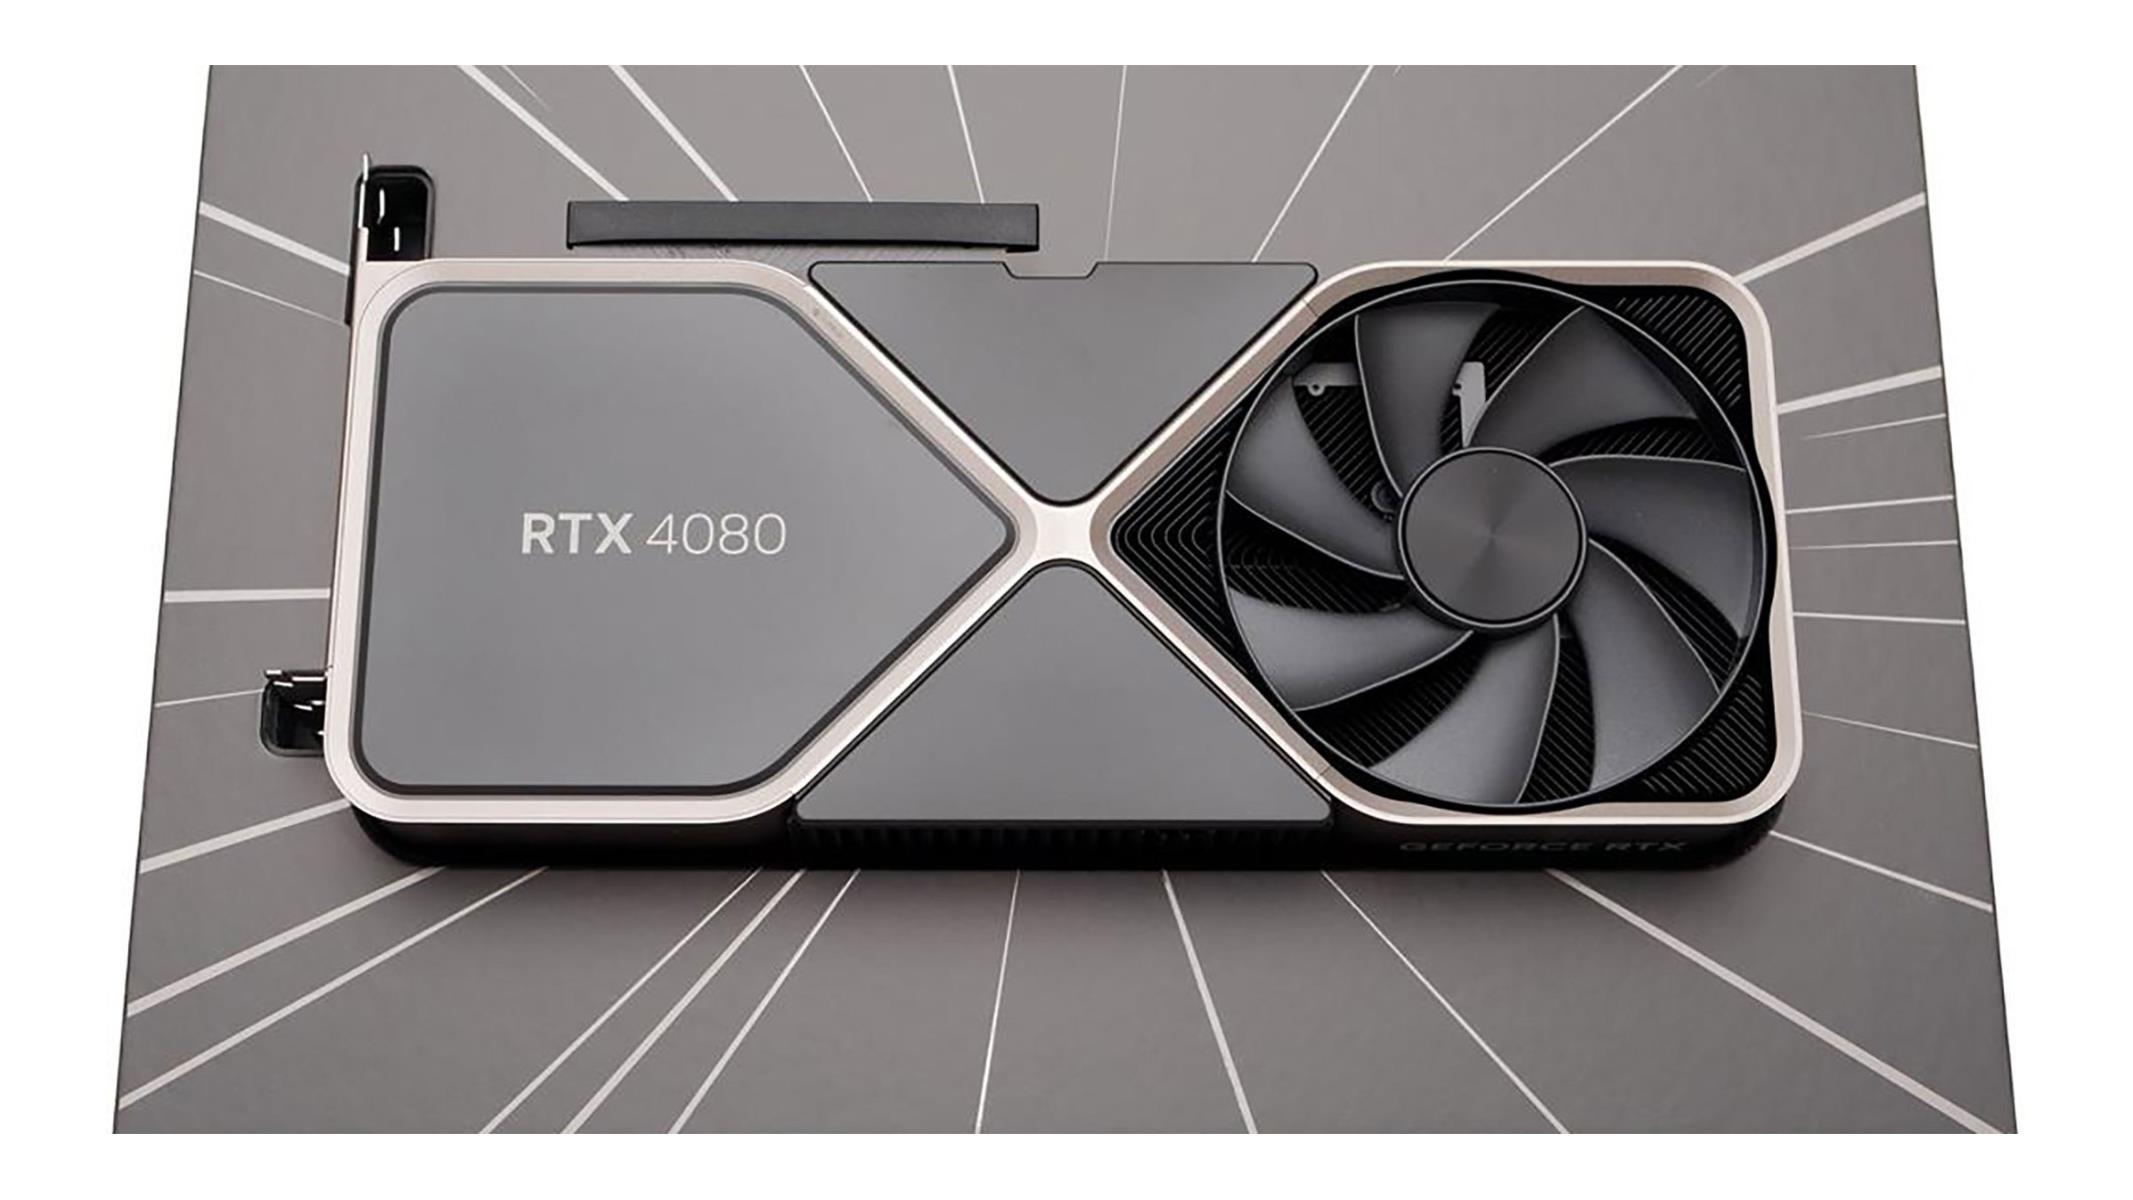 NVIDIA GeForce RTX 4090 & RTX 4080 Receive 5% Price Cut In Europe, Now  Available Below MSRP